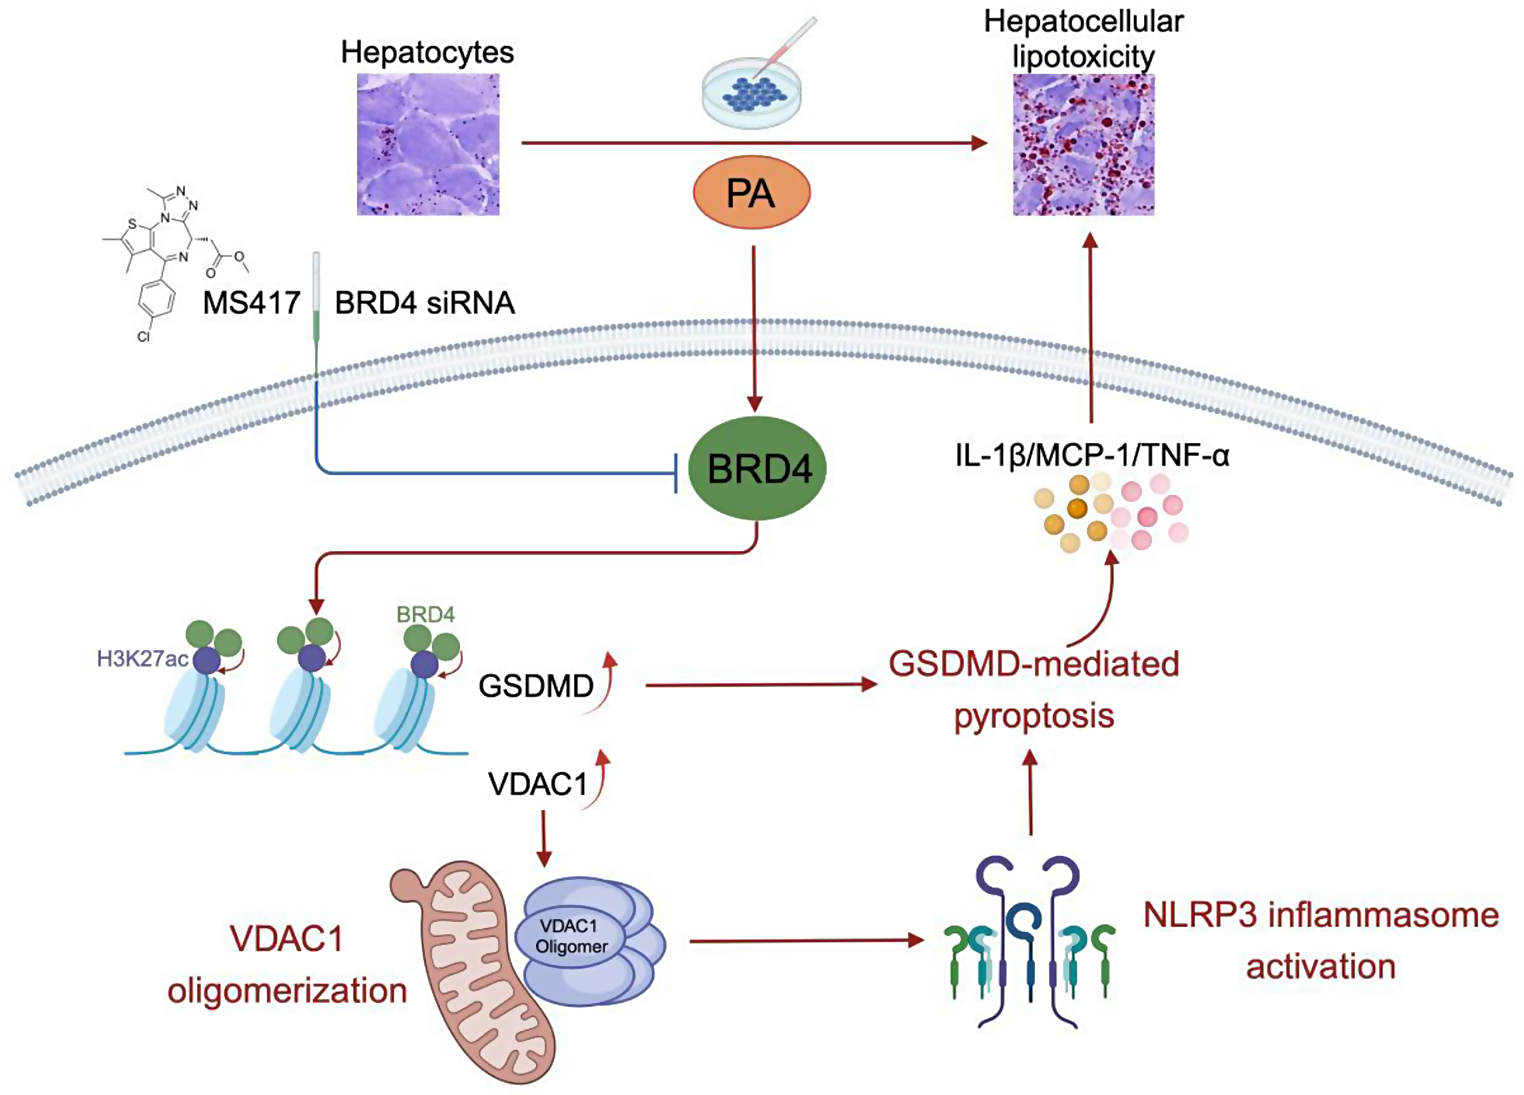 Targeting BRD4 mitigates hepatocellular lipotoxicity by suppressing the NLRP3 inflammasome activation and GSDMD-mediated hepatocyte pyroptosis